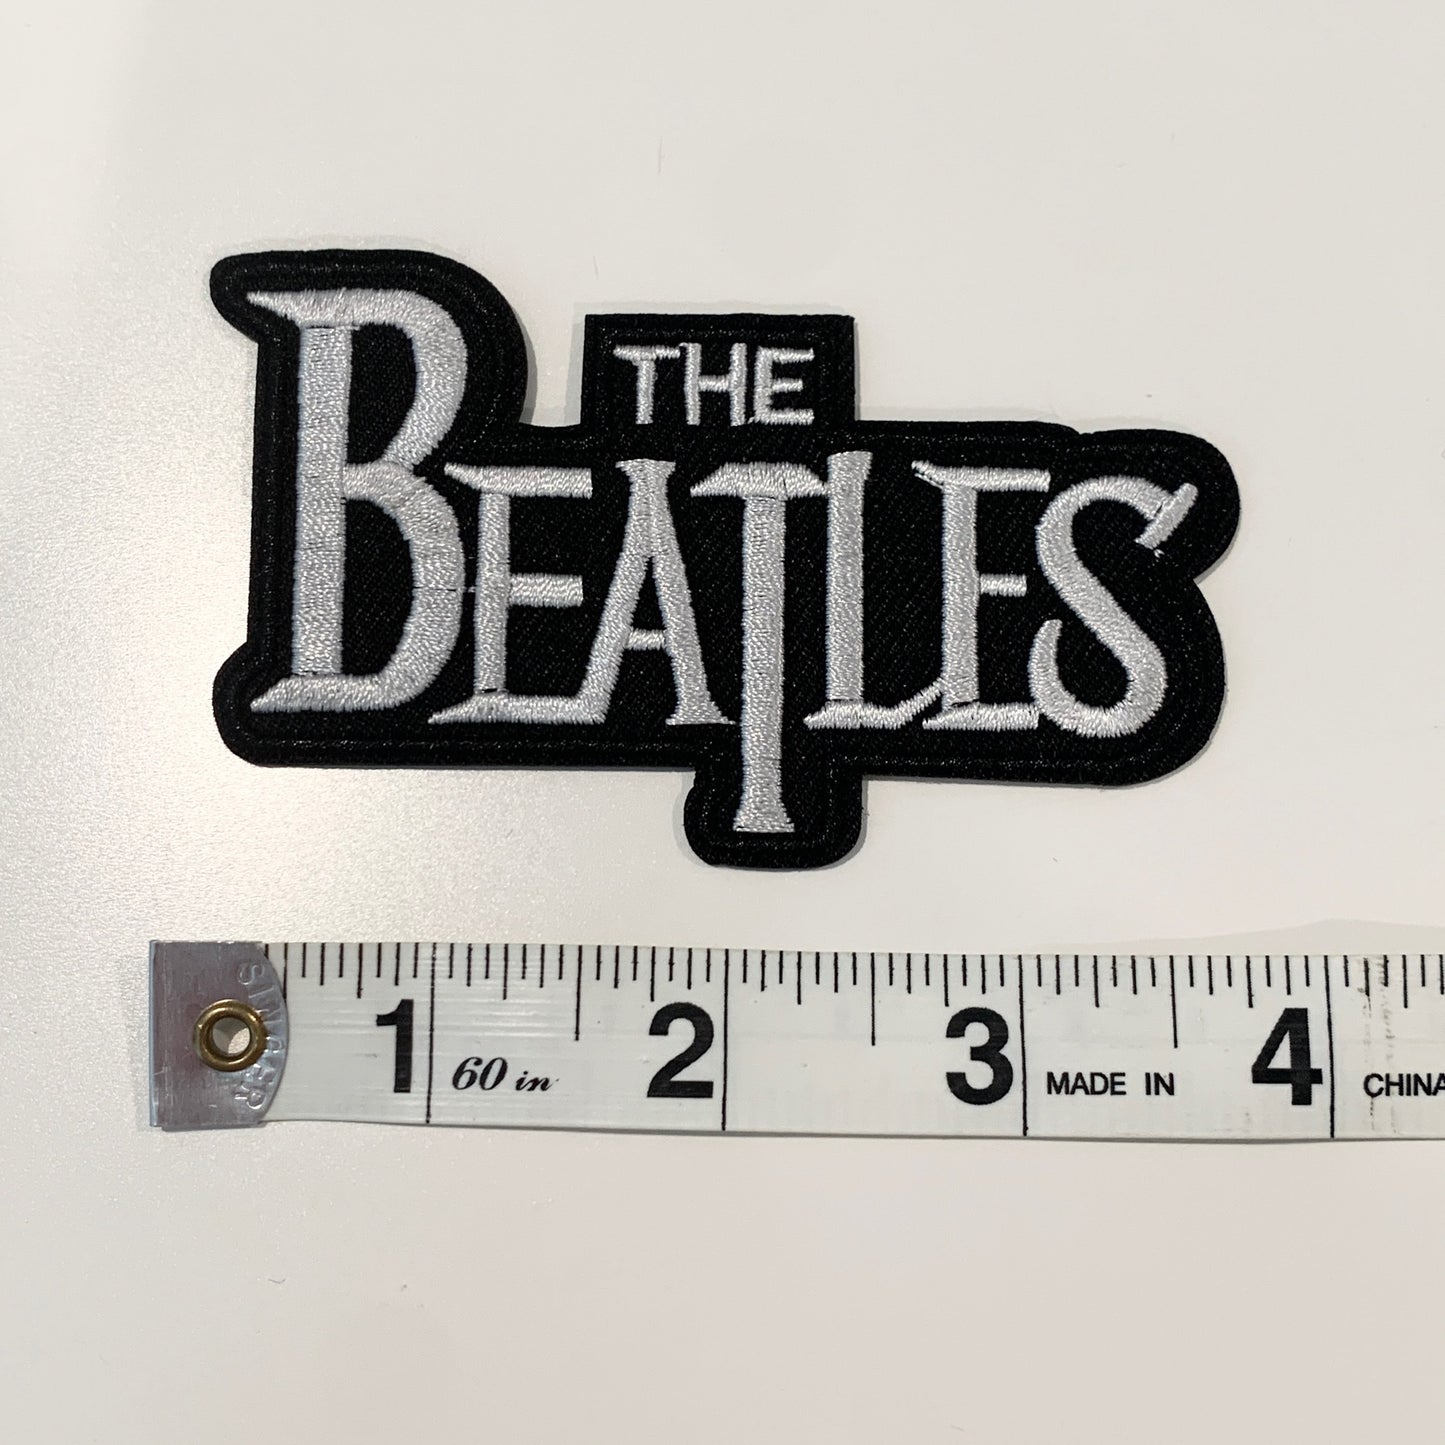 THE BEATLES Patch